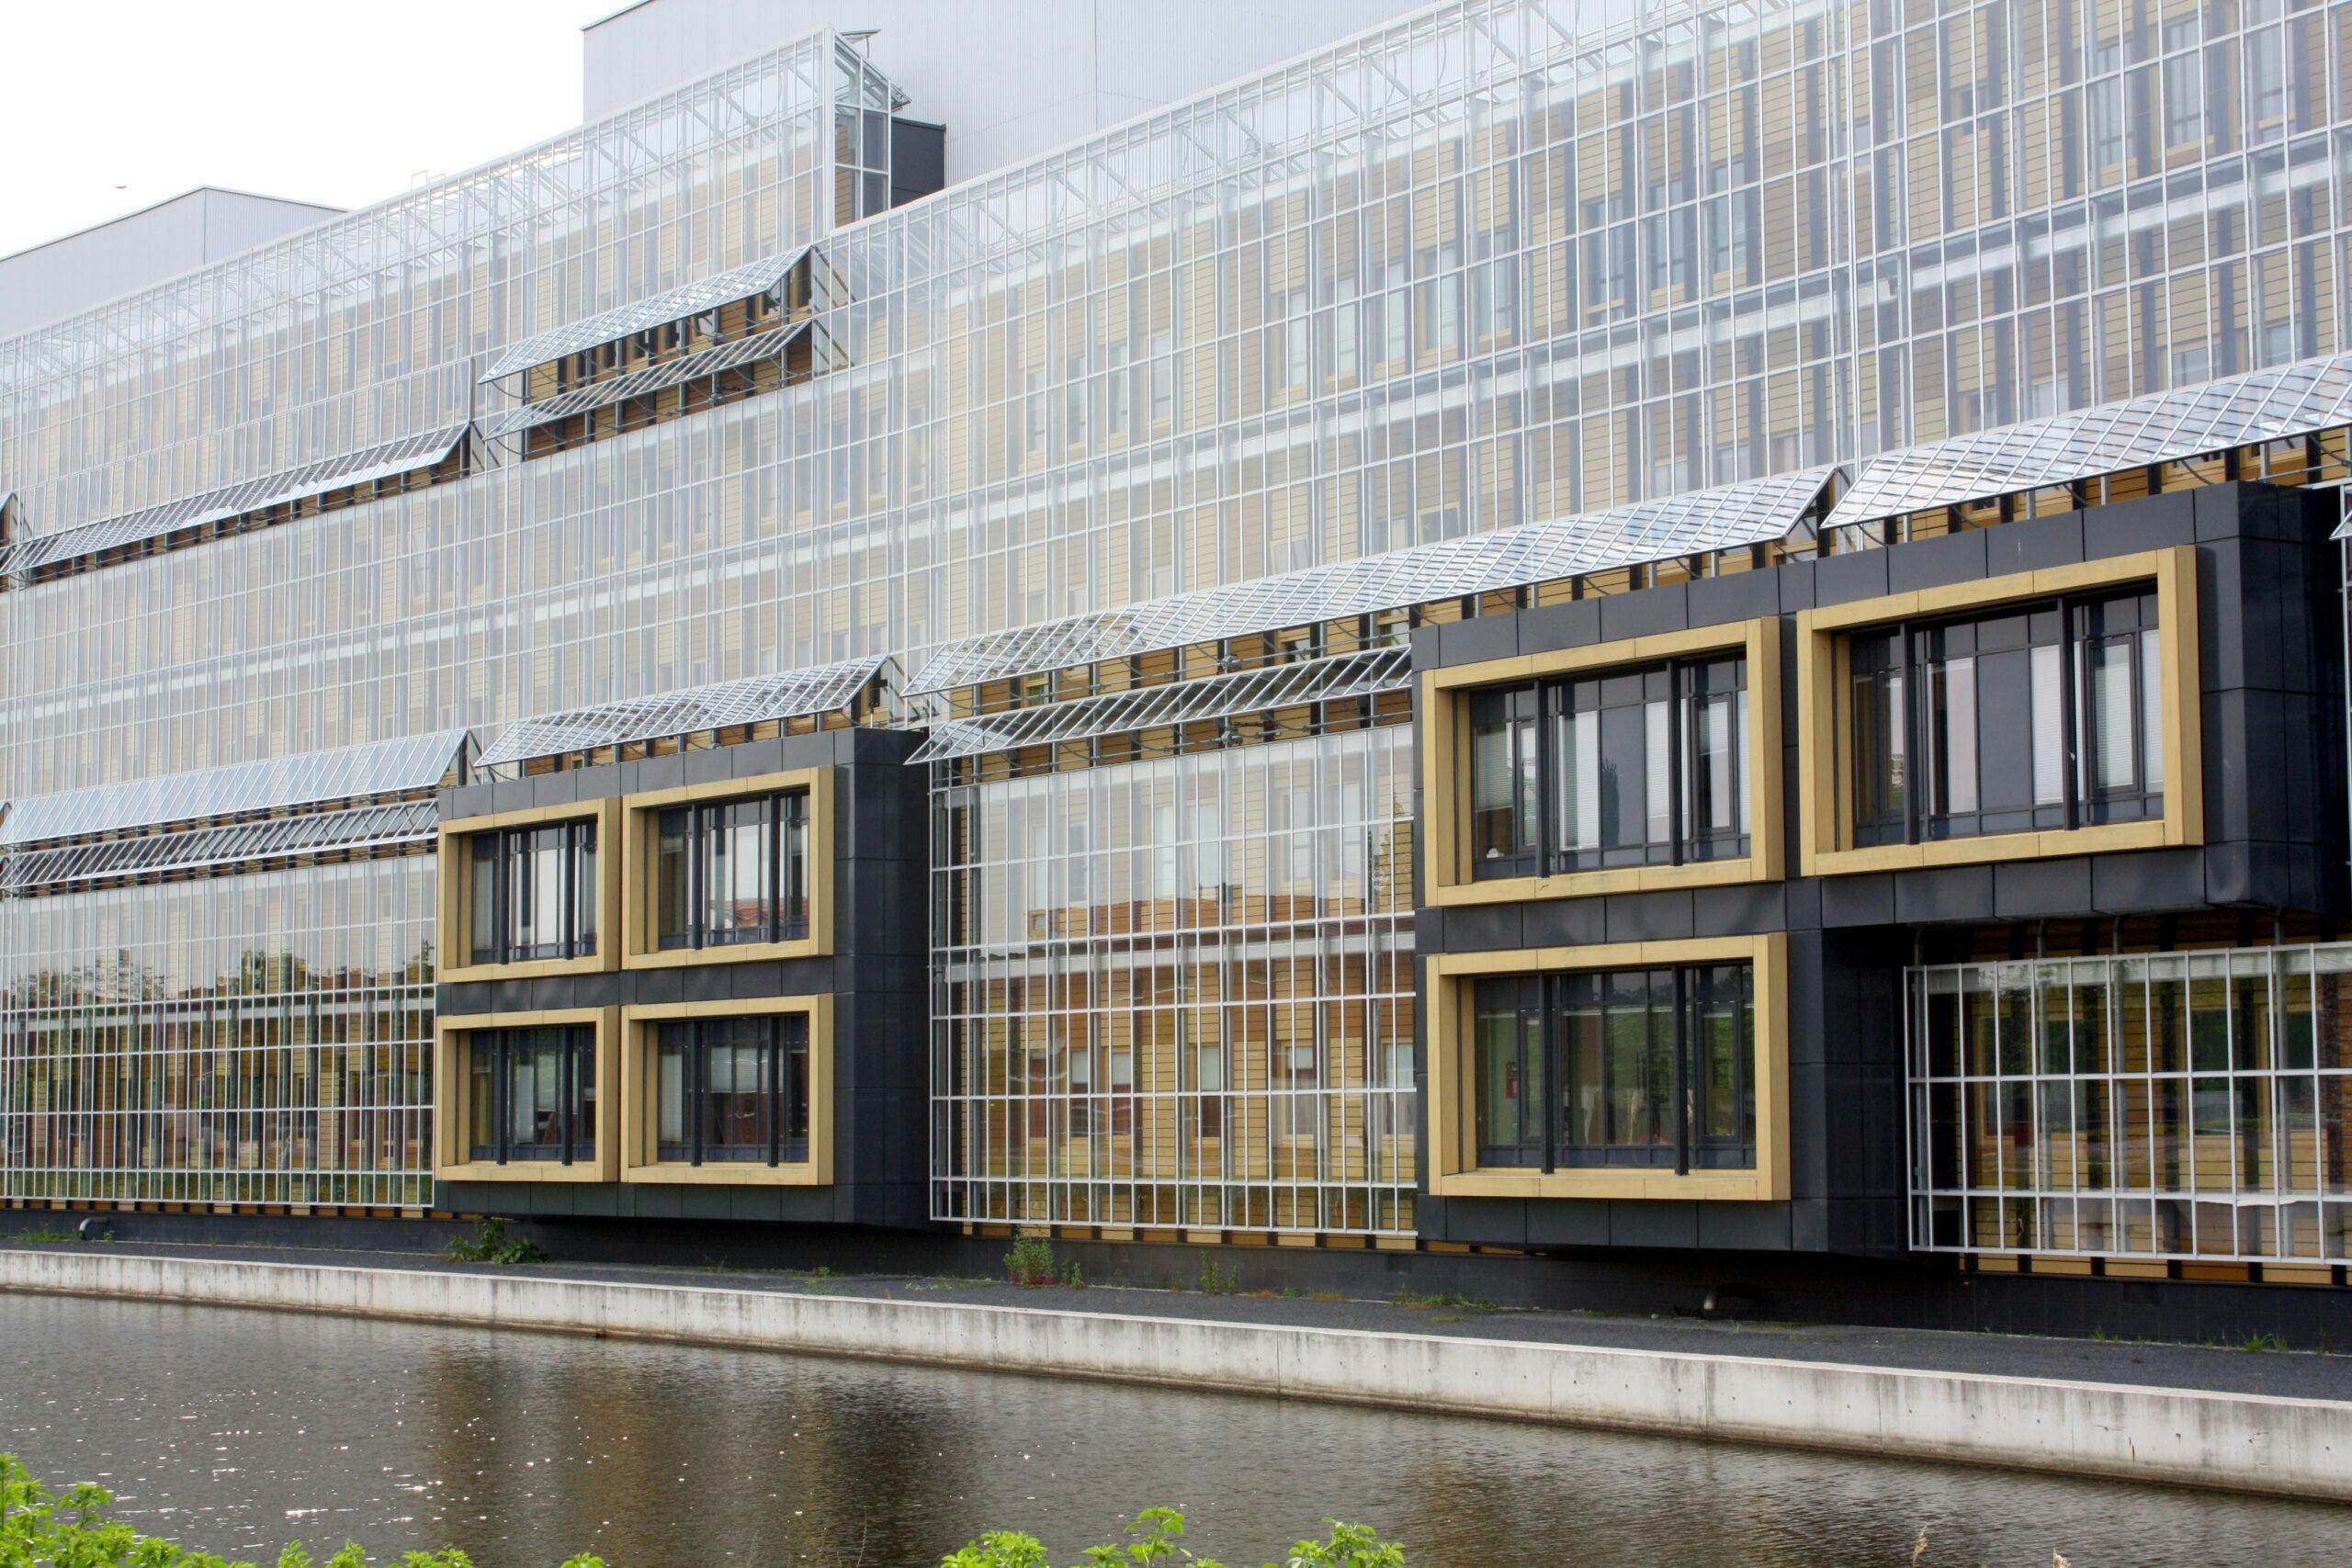 Back of the Martini Hospital in Groningen in the Netherlands